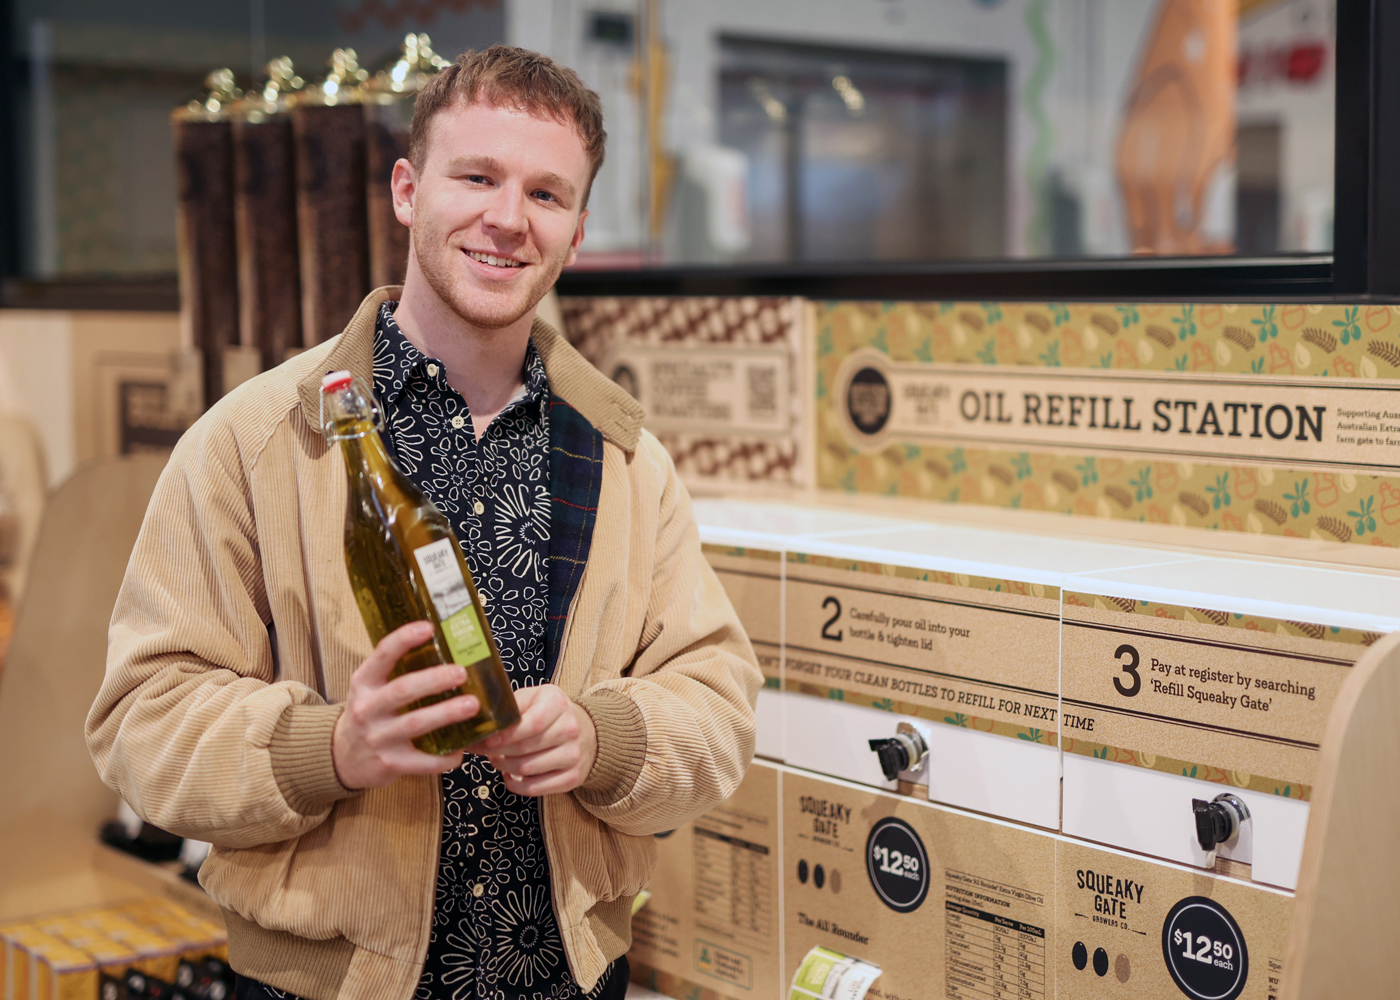 Coles Local Fitzroy is the first Coles store in the country to feature a refillable olive oil station